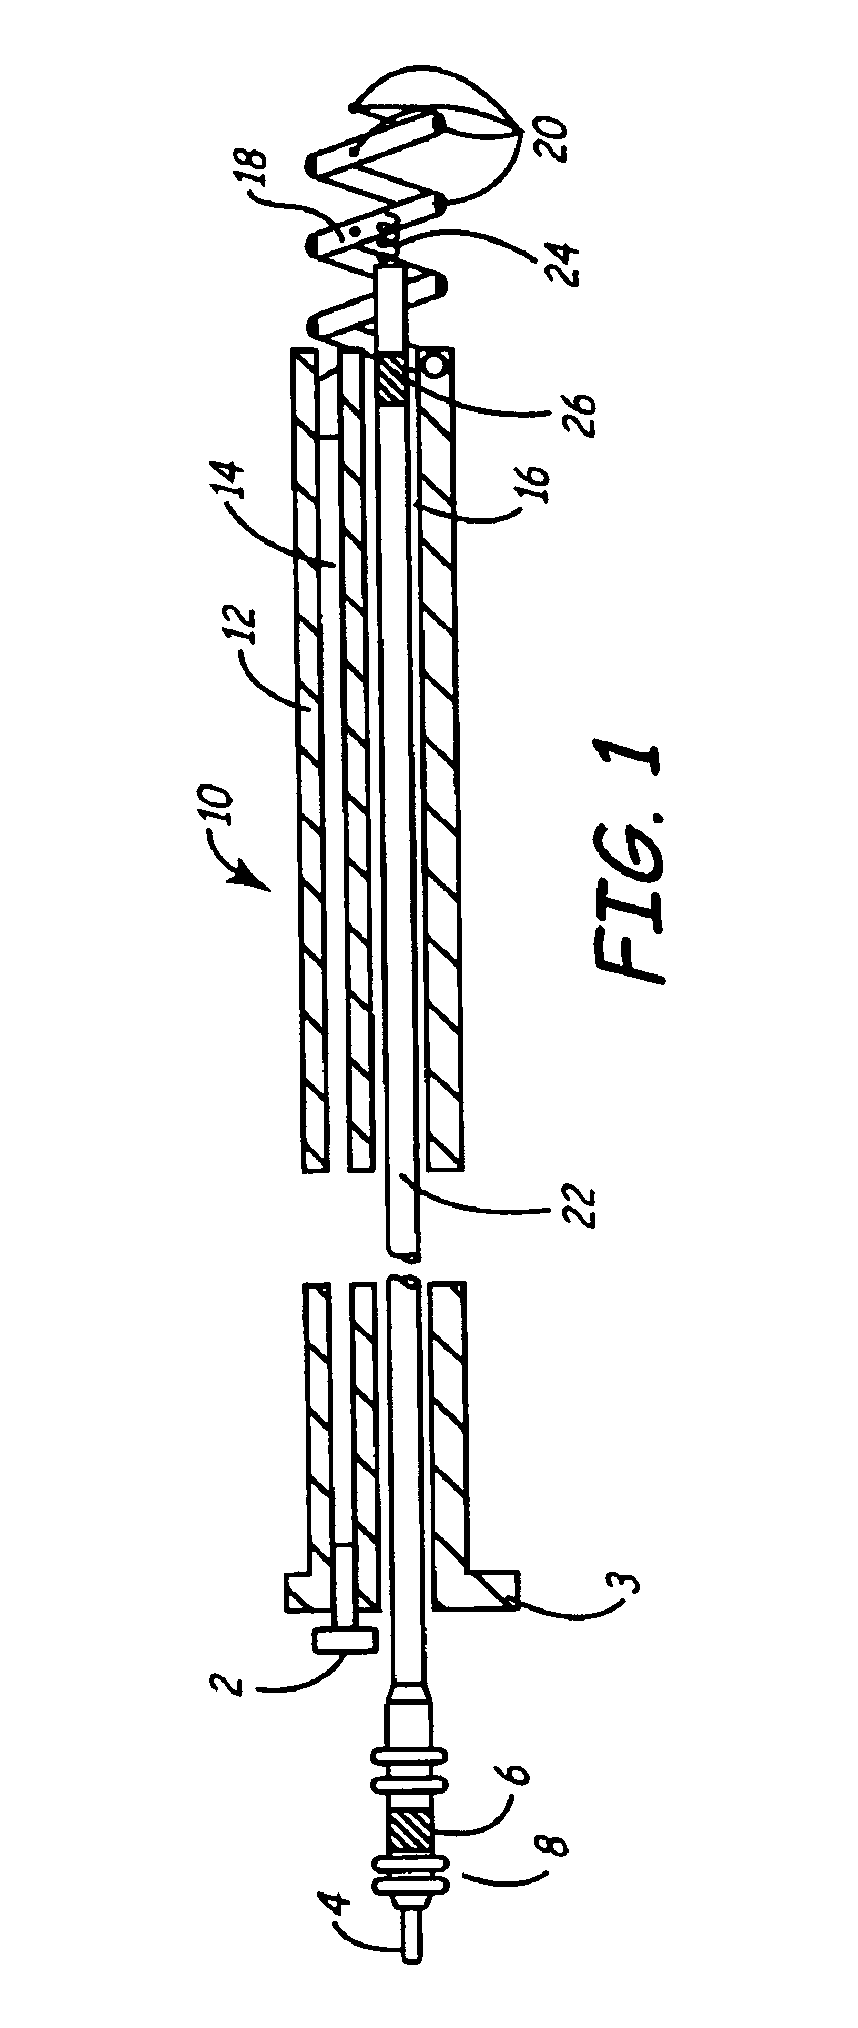 Delivery of active fixation implatable lead systems